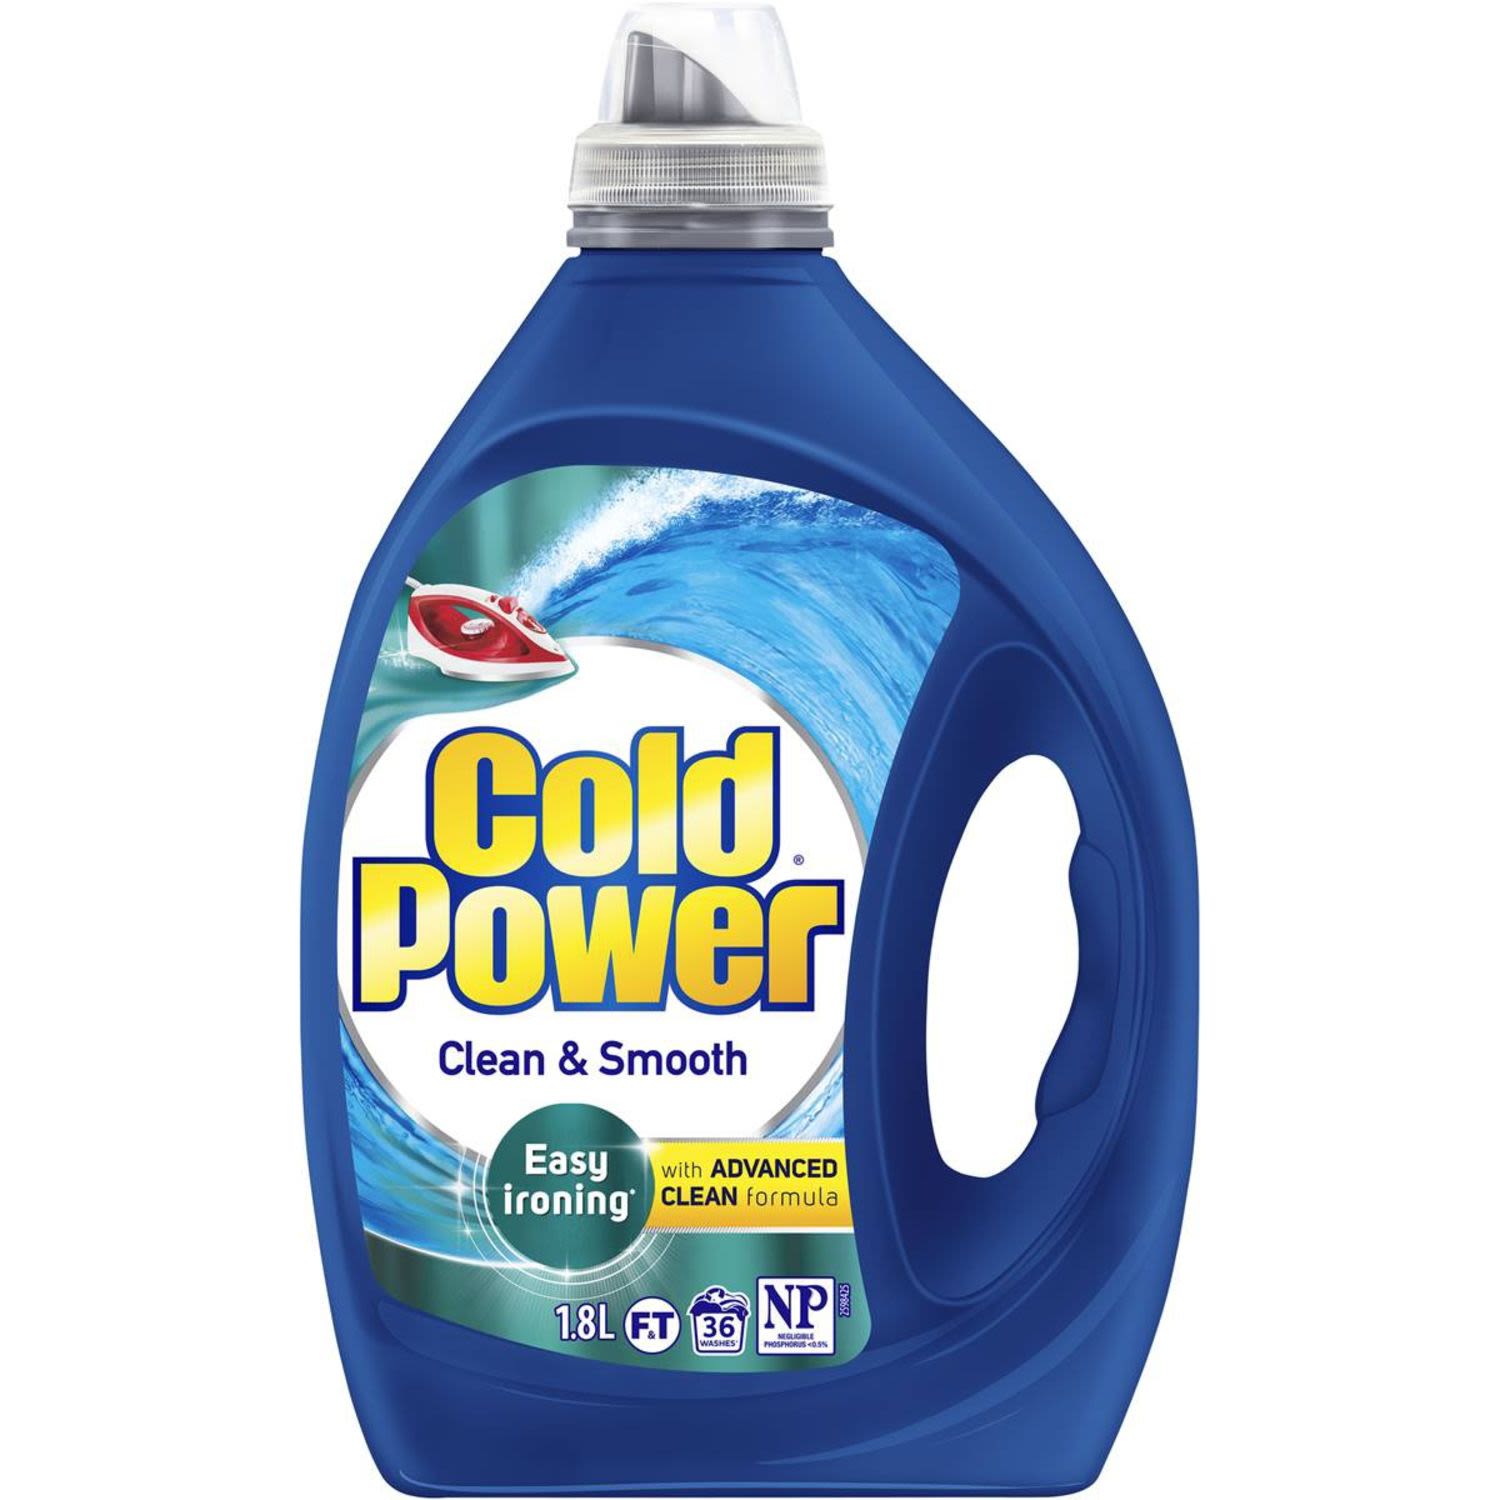 Cold Power Clean & Smooth Laundry Detergent Liquid Easy Ironing, 1.8 Litre